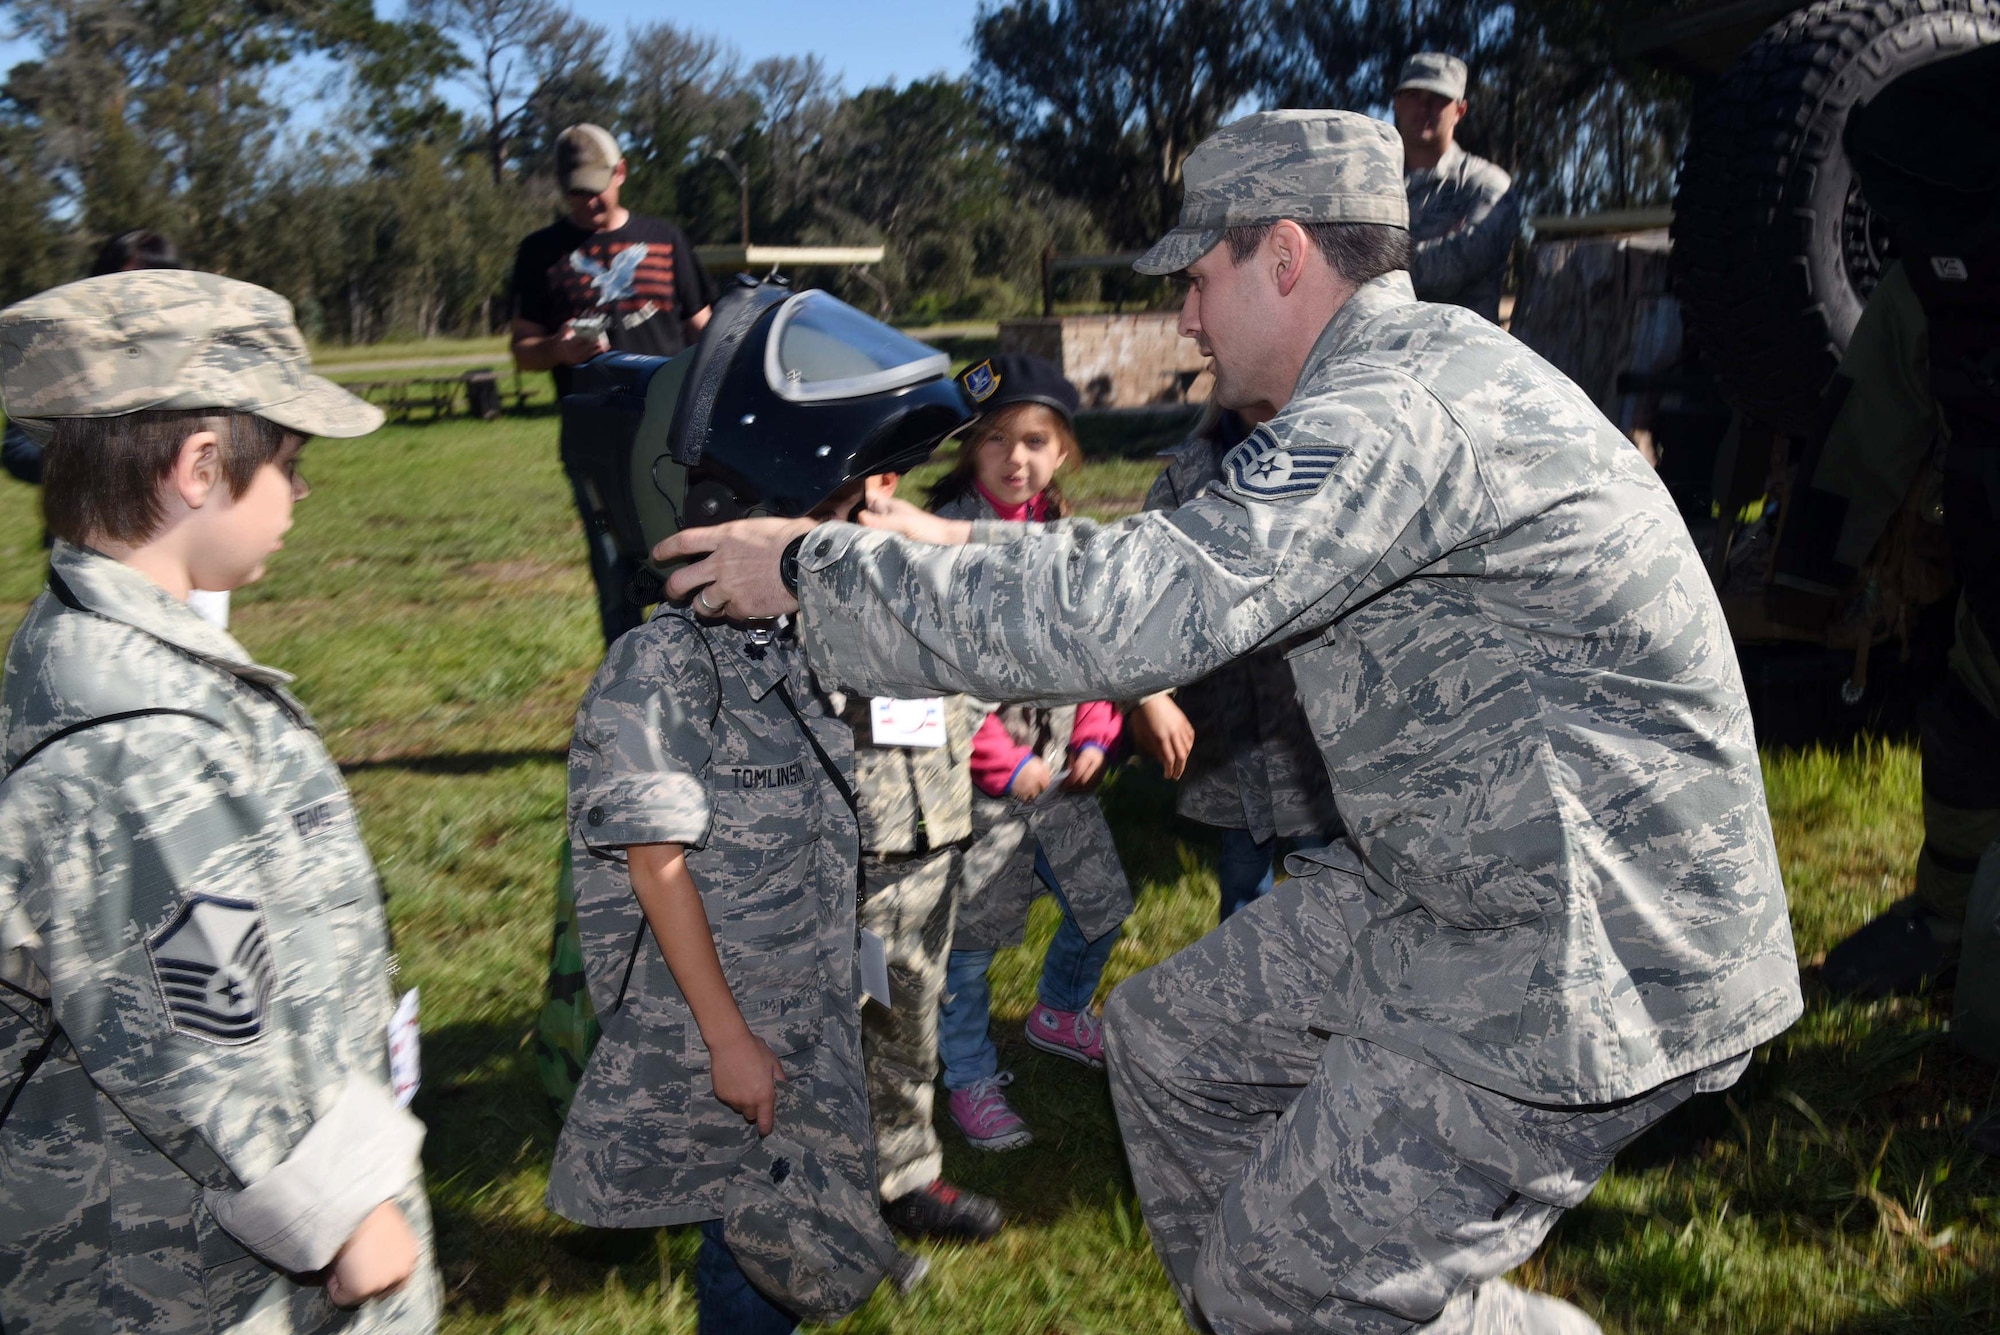 Staff Sgt. Thane Adams, 30th Civil Engineer Squadron explosive ordnance disposal specialist, demonstrates the EOD-9 bomb suit during Kids Understanding Deployment Operations, March 29, 2016, Vandenberg Air Force Base, Calif. KUDOS is a program developed to give children a deeper understanding of the military deployment process and equipment utilized during a deployment. (U.S. Air Force photo by Staff Sgt. Jim Araos/Released)